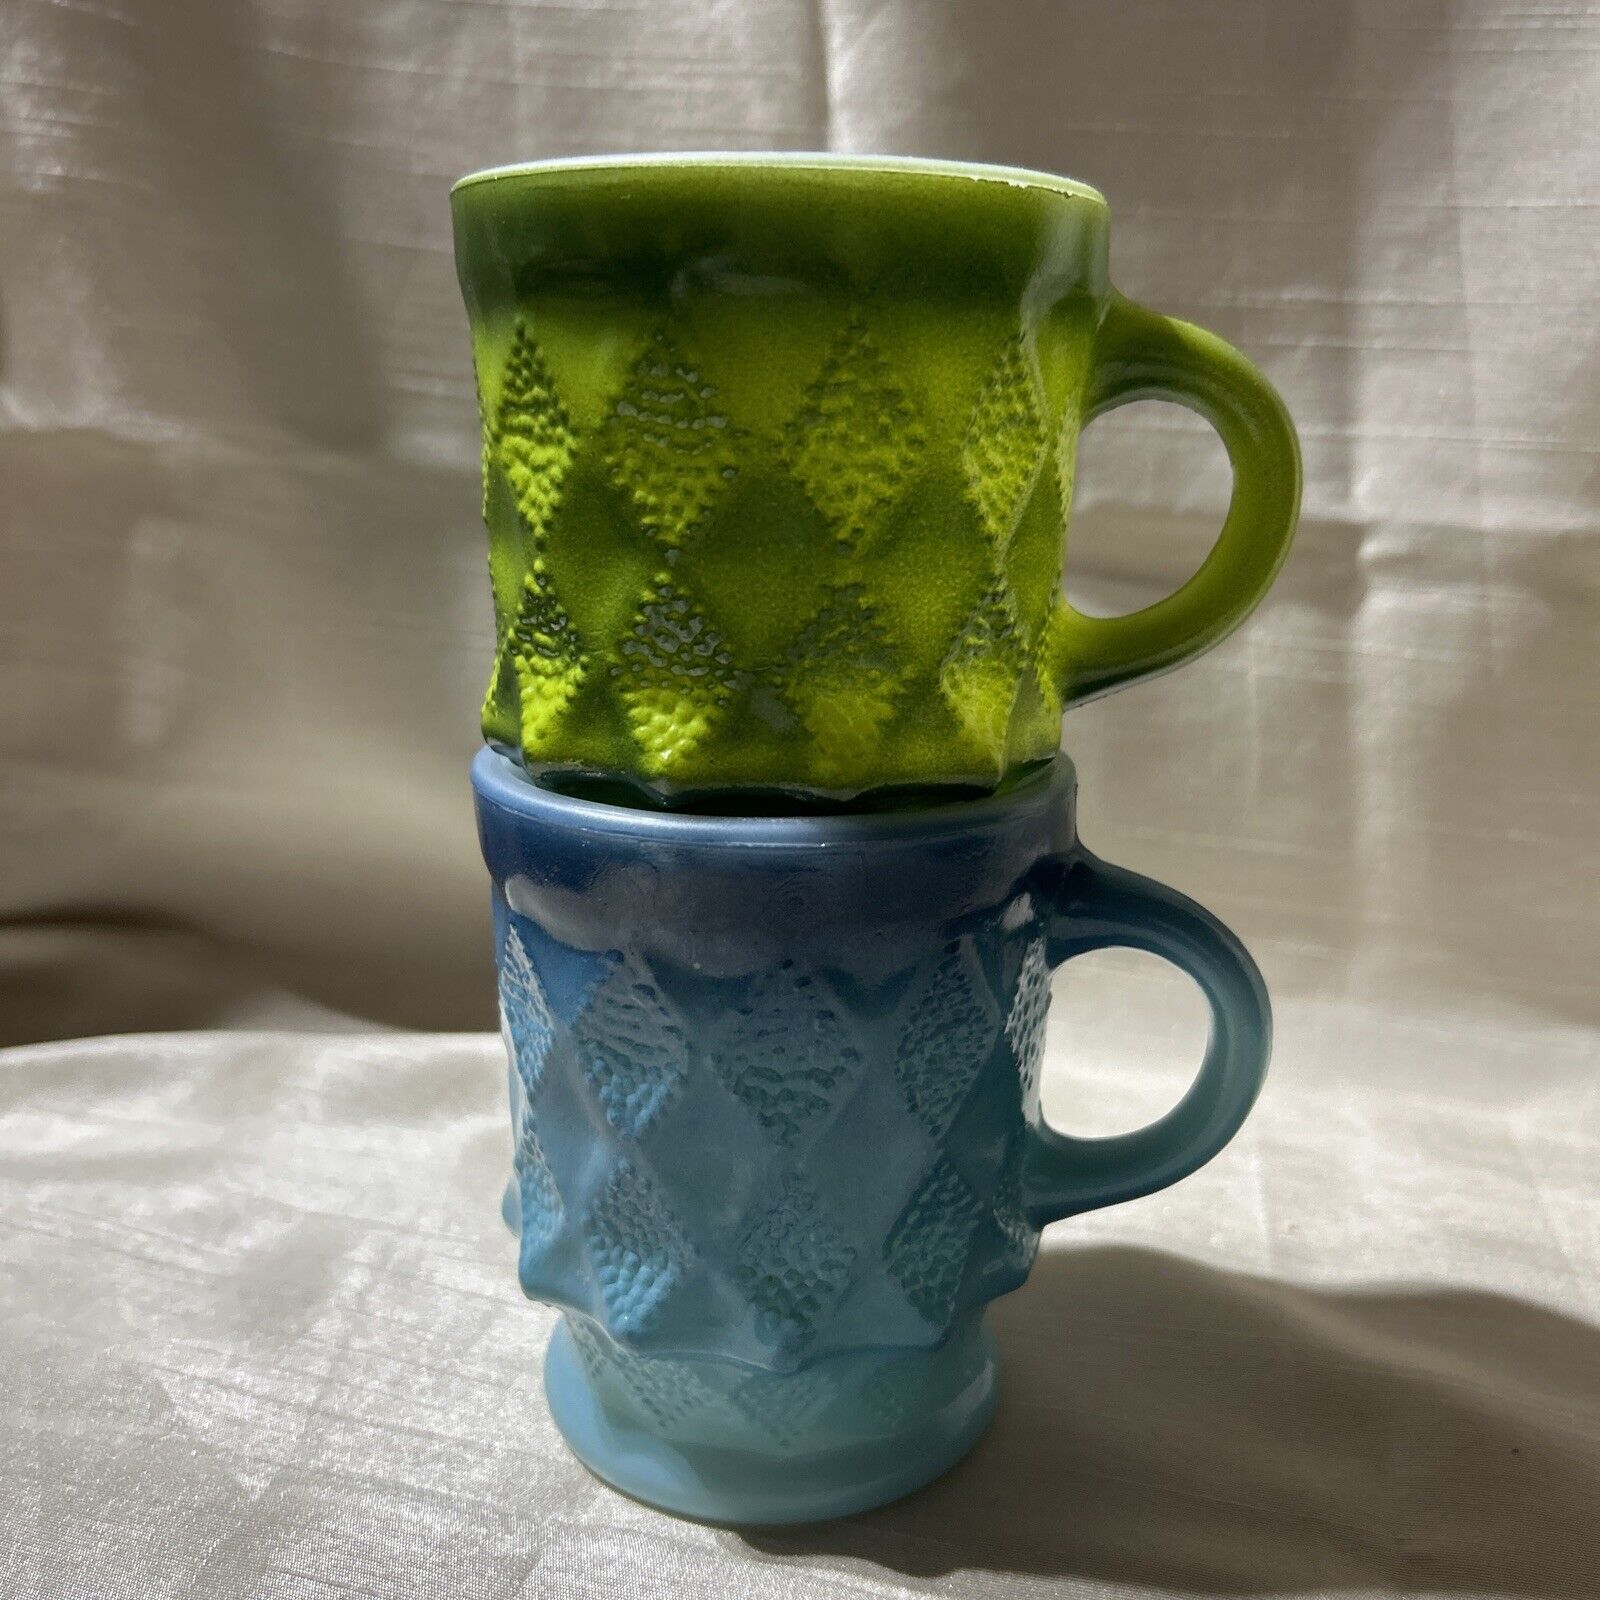 Set 2 Vintage Fire King Kimberly~Coffee Mugs Anchor Hocking Green & Blue Ombre